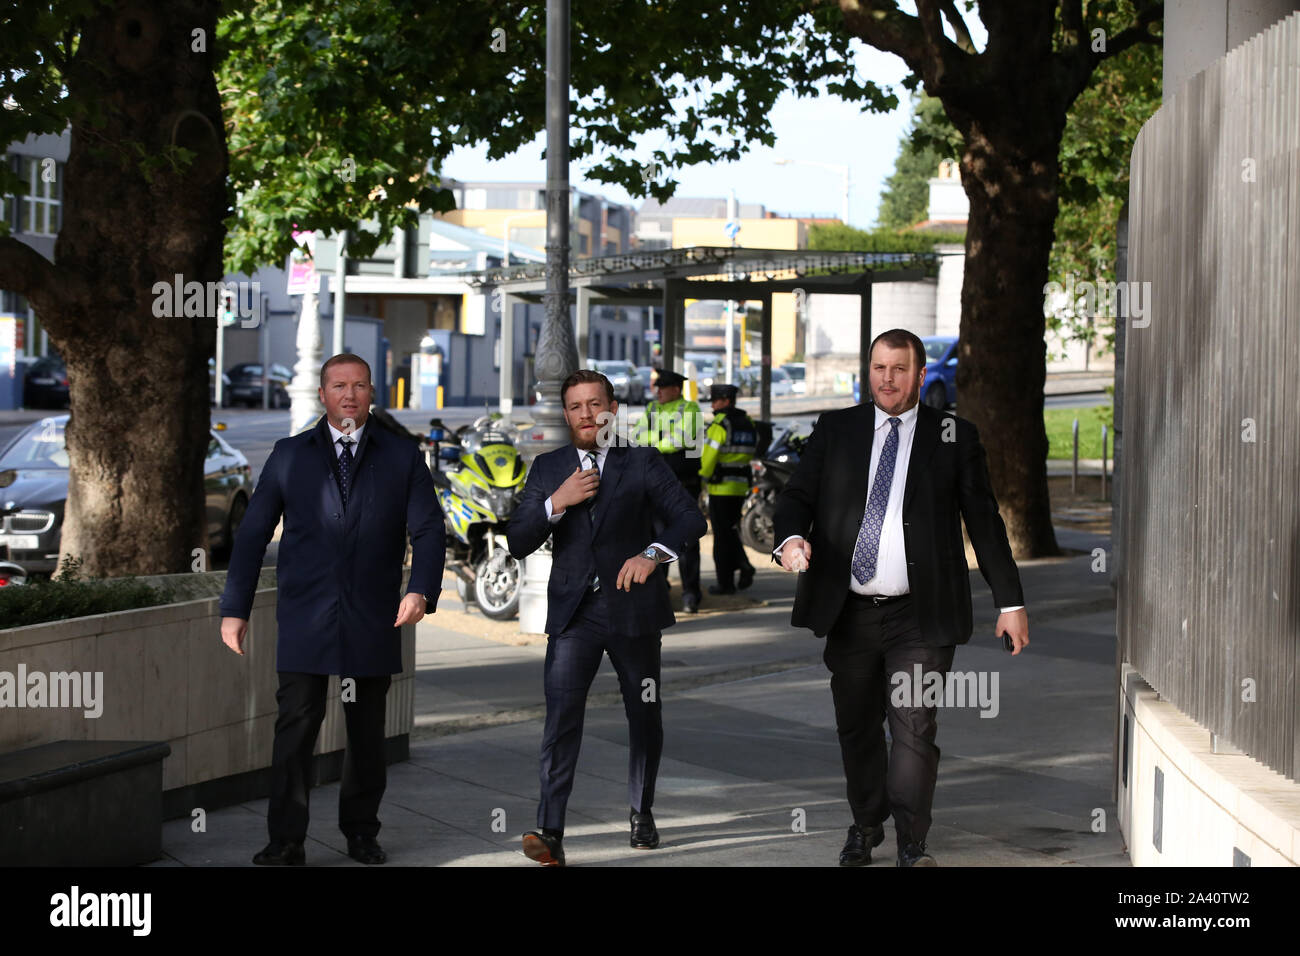 Dublin, Ireland. 11th Oct, 2019. Conor McGregor. Pictured UFC Fighhter  Conor McGregor arriving at the Central Criminal Courts of Justice in Dublin this morning in connection with an alleged assault in Dublin earlier this year. The MMA star faces a single assault charge following an incident at the Marble Arch pub in Drimnagh on April 6th. Credit: RollingNews.ie/Alamy Live News Stock Photo